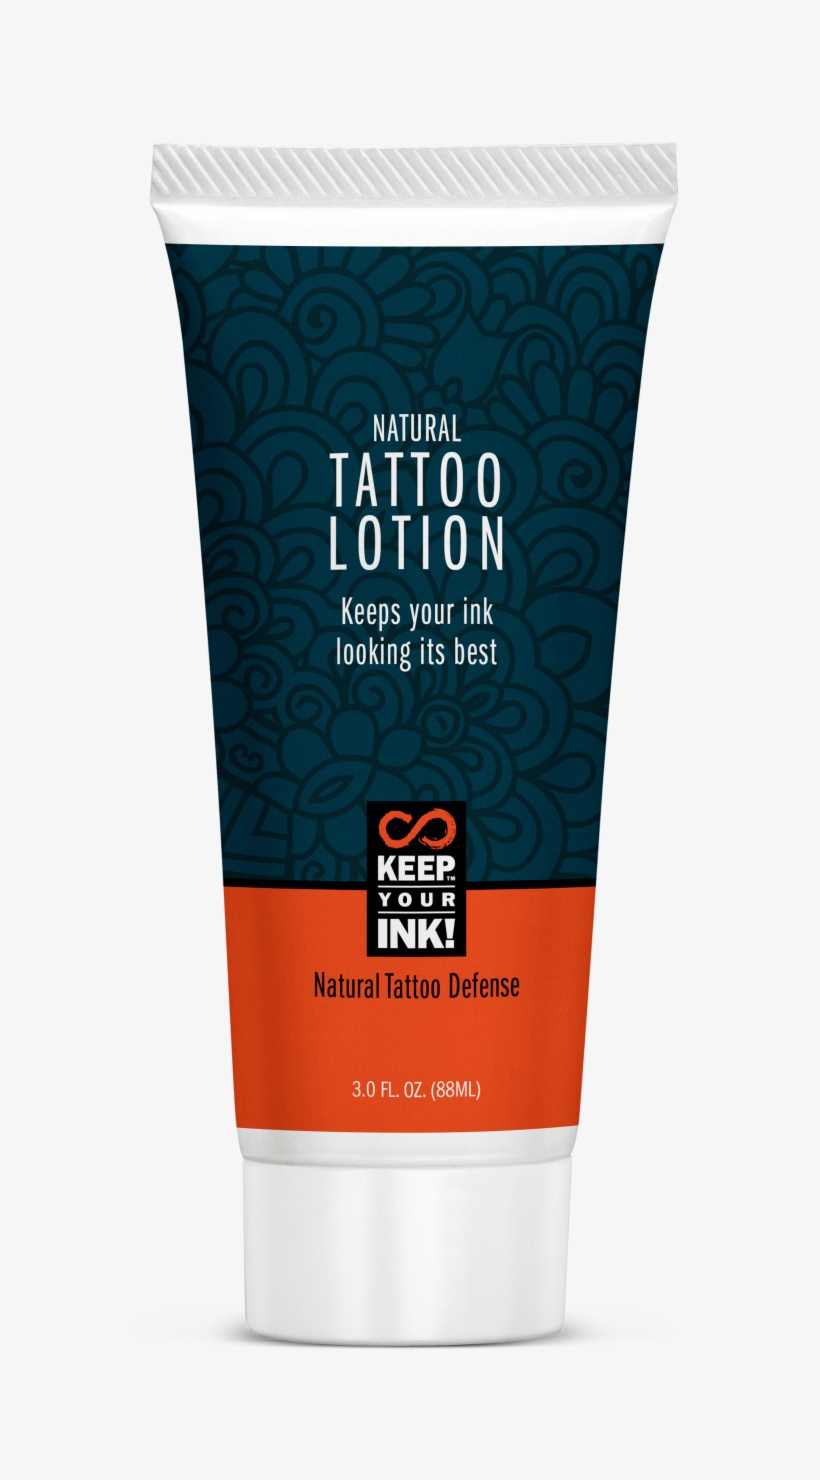 Natural Tattoo Lotion - Chinese Tubes For Lotion, transparent png #1614027